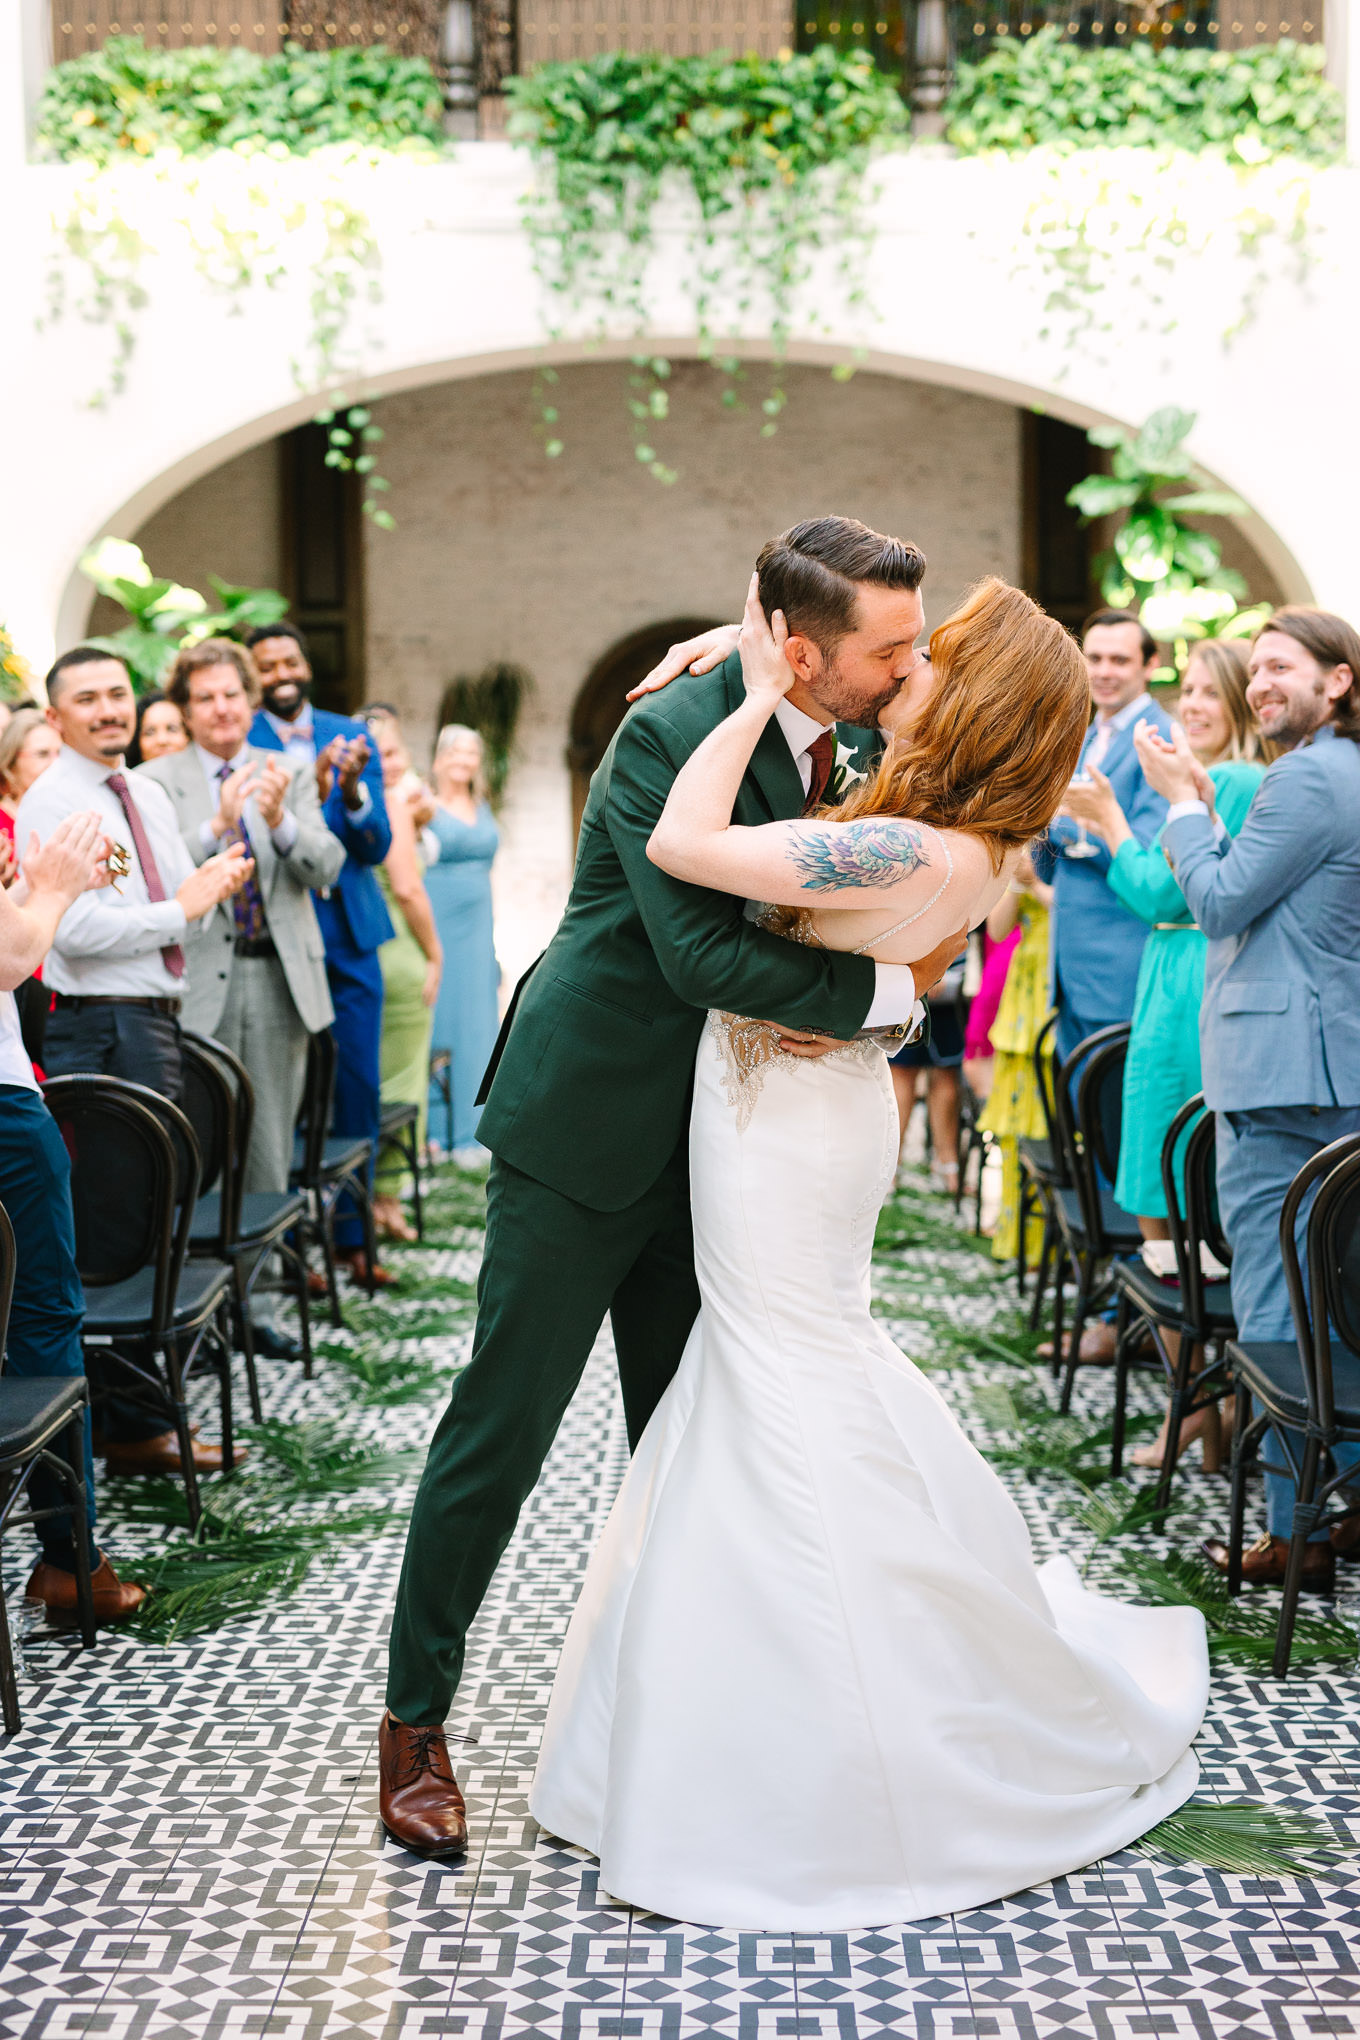 Ebell Long Beach Wedding | Wedding and elopement photography roundup | Los Angeles and Palm Springs photographer | #losangeleswedding #palmspringswedding #elopementphotographer Source: Mary Costa Photography | Los Angeles